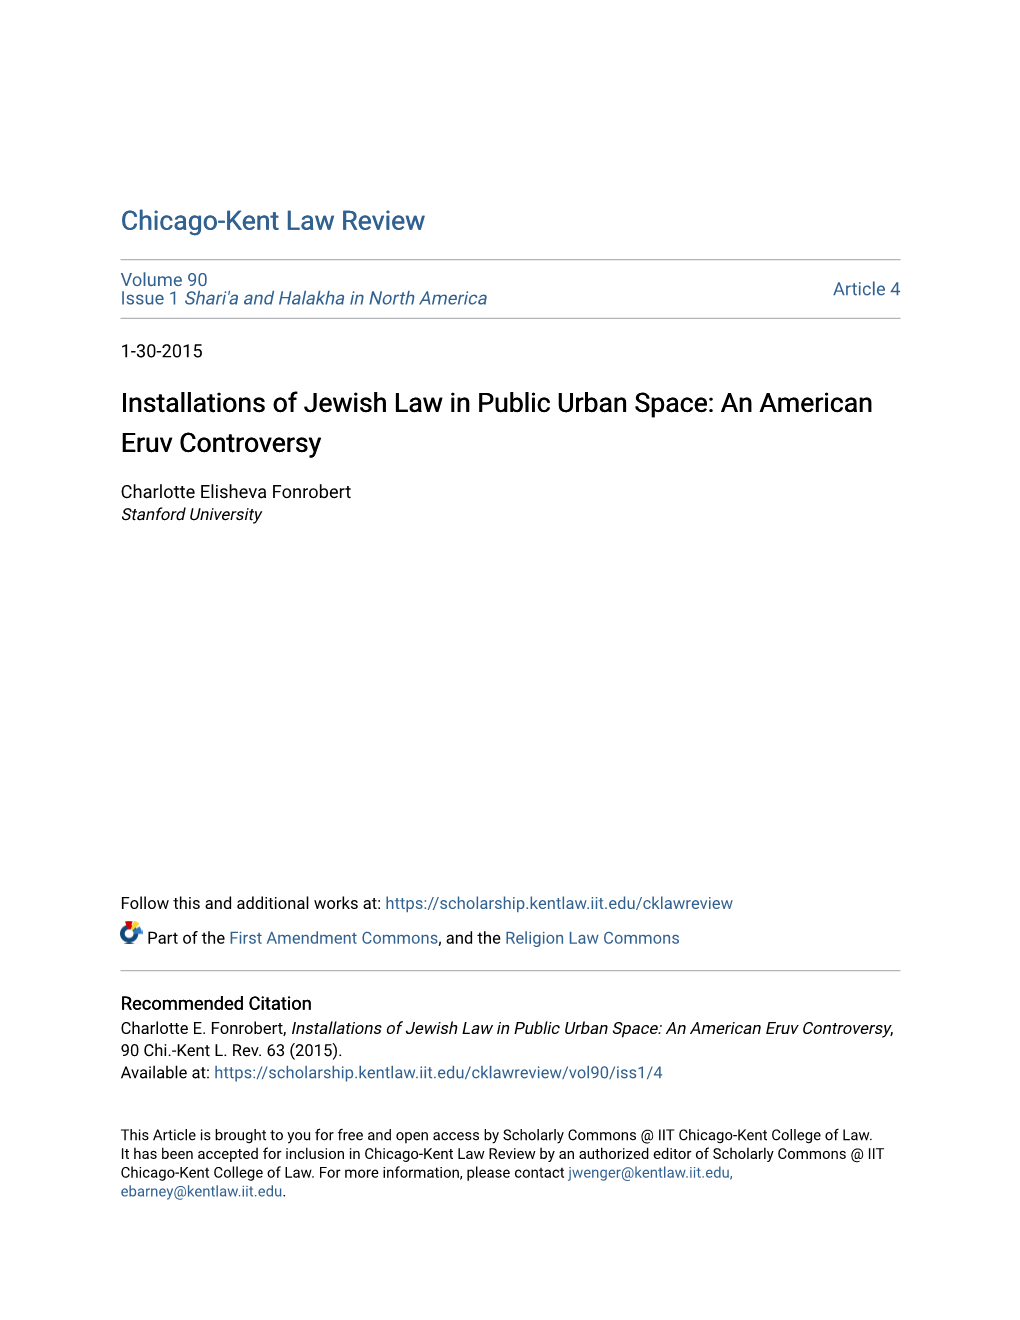 Installations of Jewish Law in Public Urban Space: an American Eruv Controversy